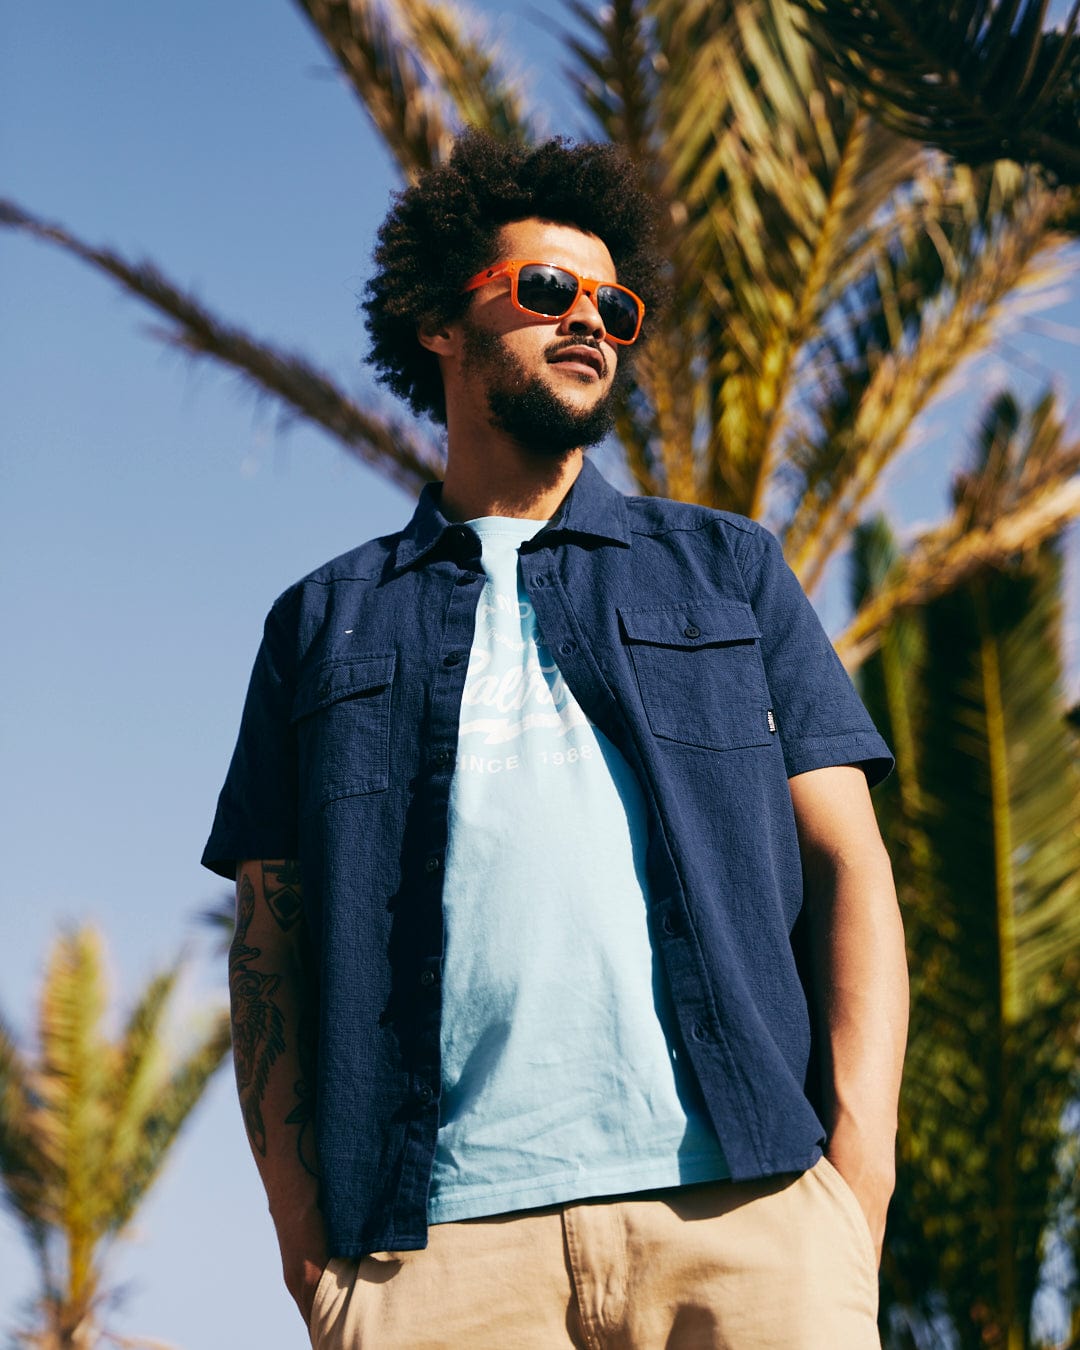 A stylish young man with an afro wearing Saltrock Ranger Recycled Polarised Sunglasses in Orange, a blue shirt, and khaki shorts stands confidently outdoors with palm trees in the background.